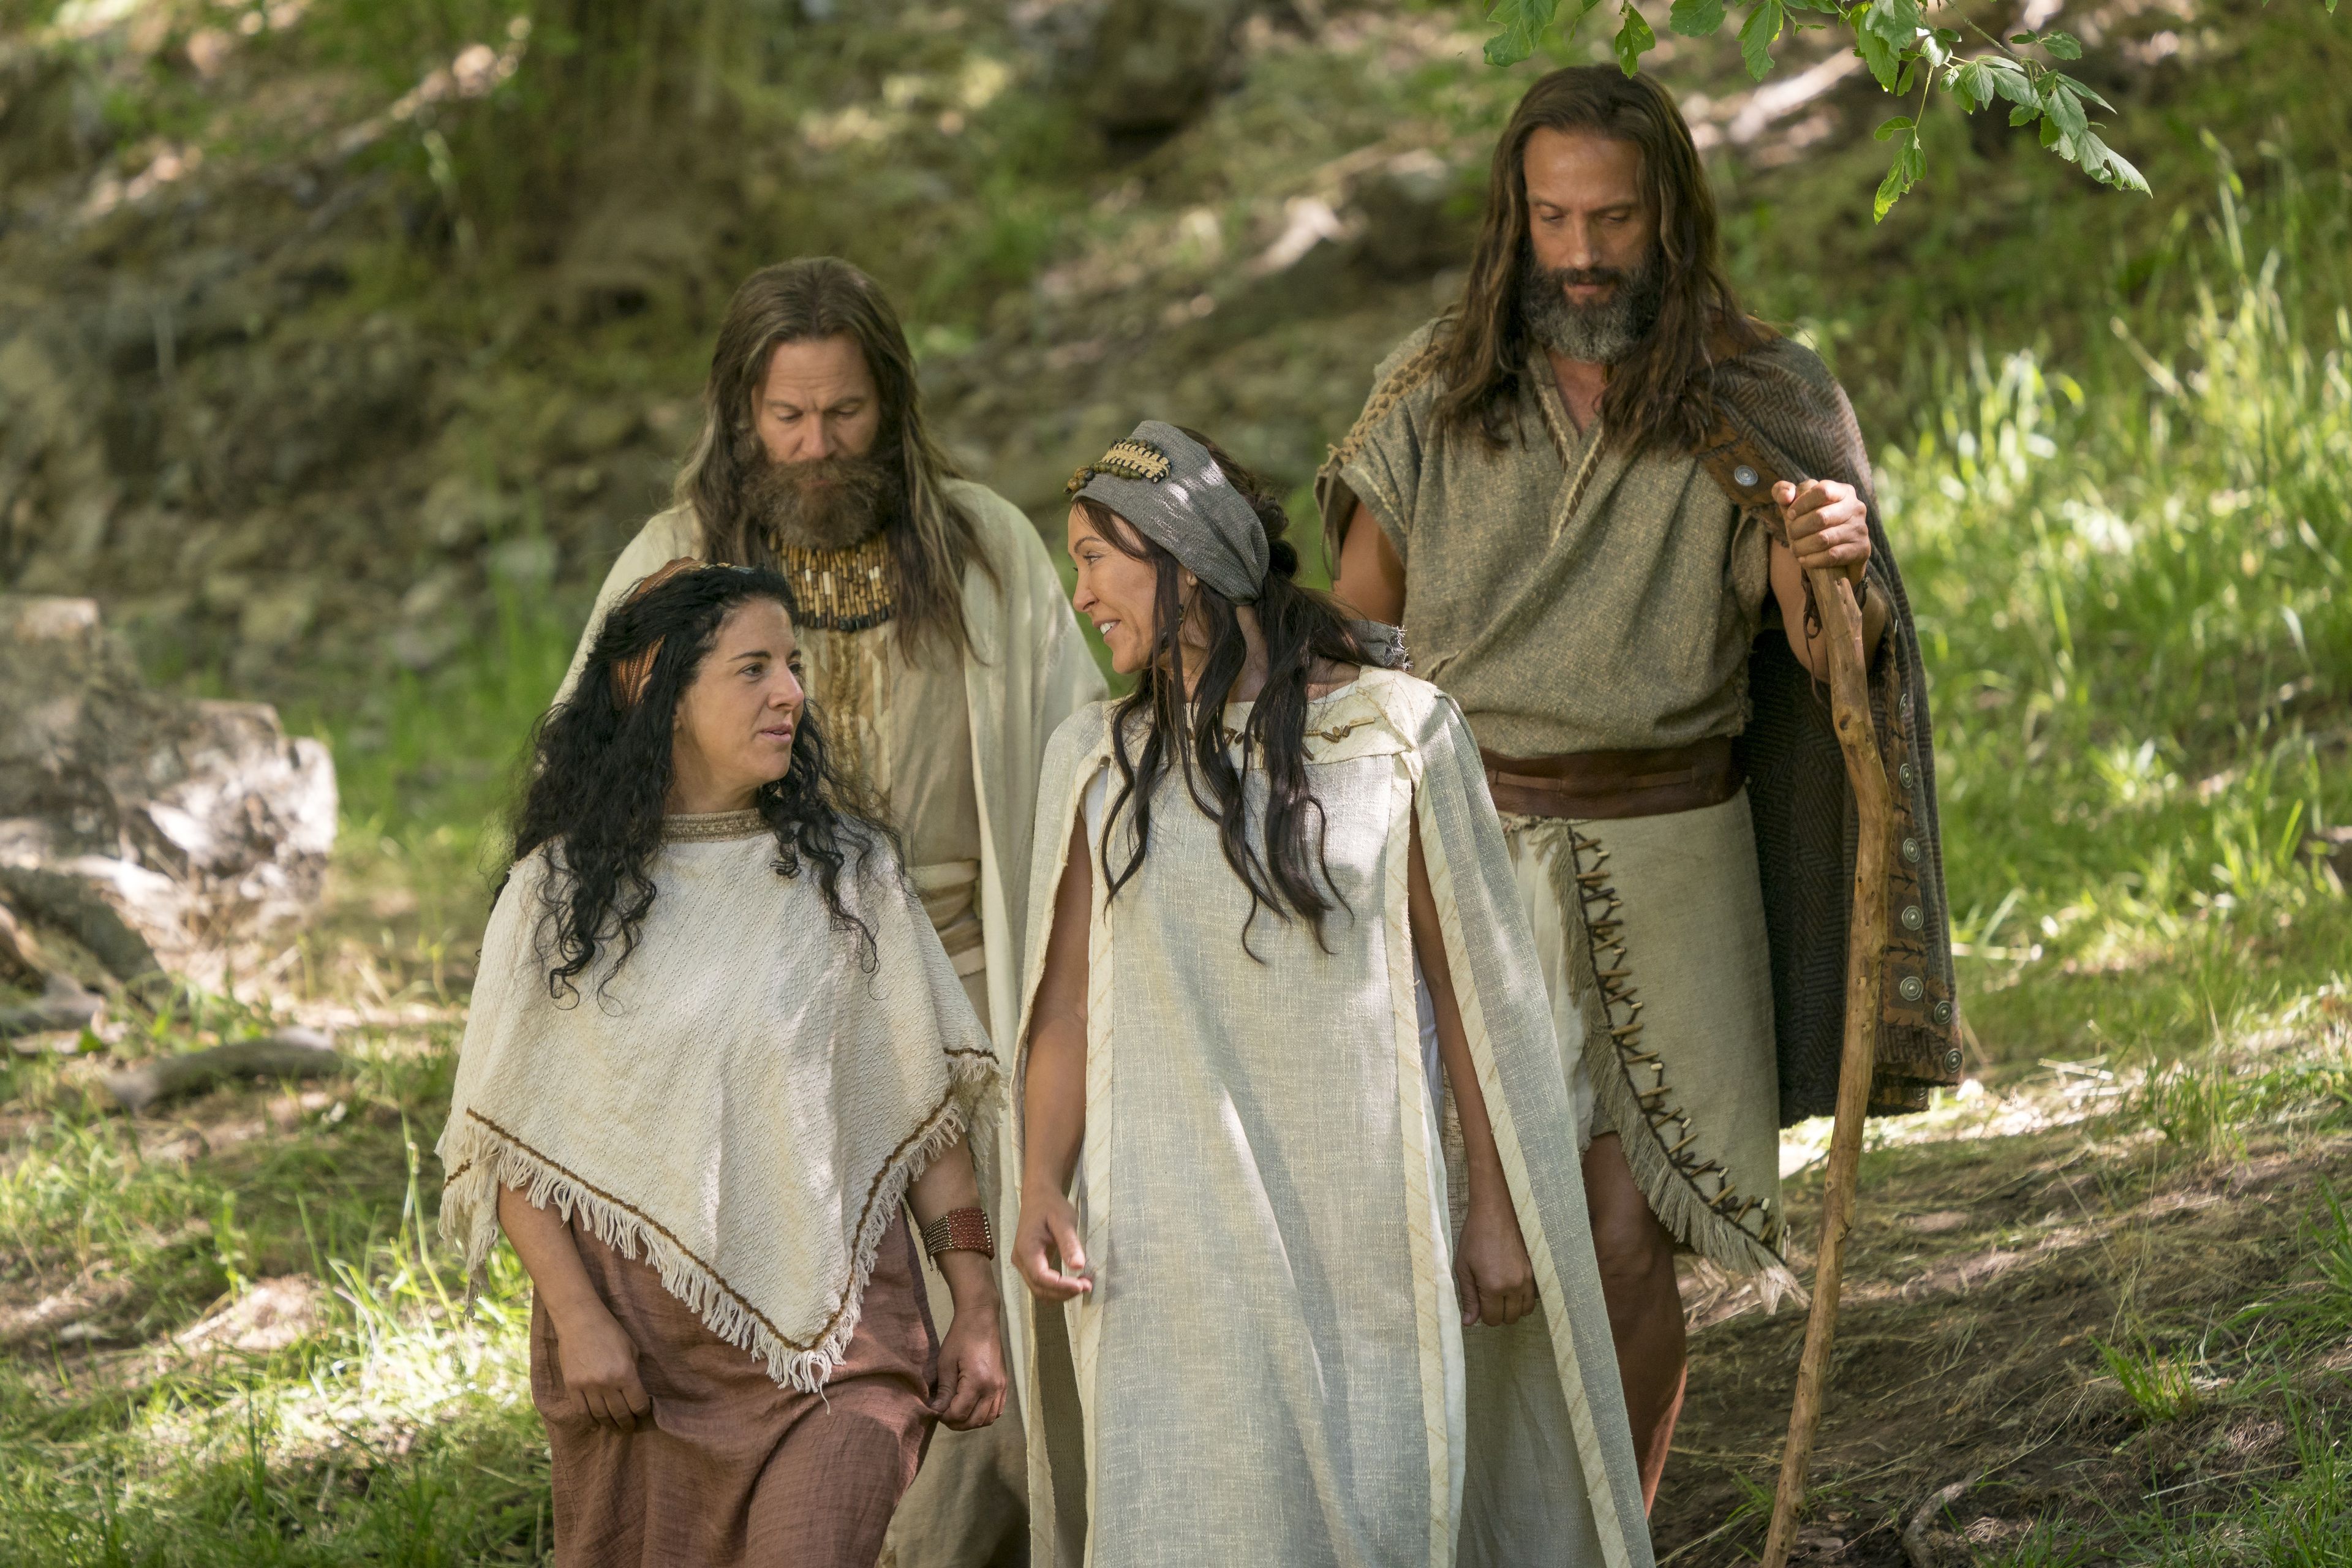 Nephi, Jacob, and their wives walking together outside.